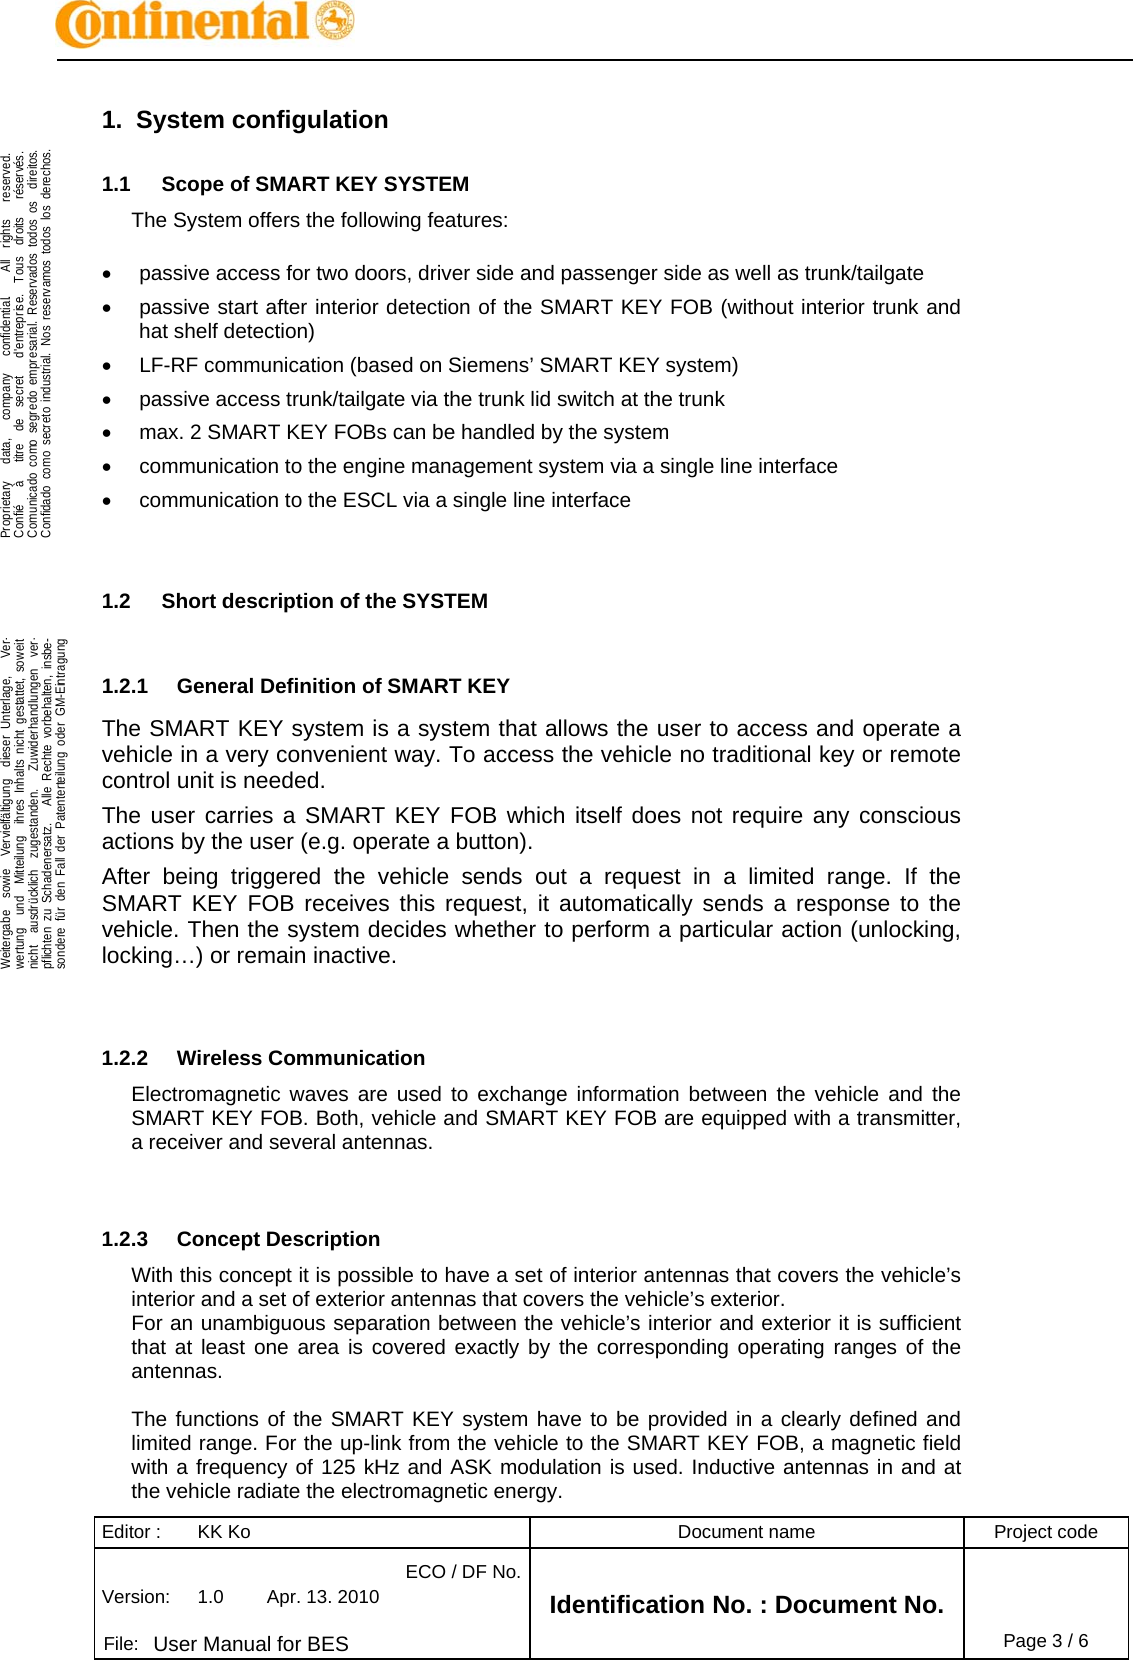 Editor :  KK Ko  Document name  Project code Version:  1.0  Apr. 13. 2010 ECO / DF No.Identification No. : Document No.   File:  User Manual for BES  Page 3 / 6    .Proprietary   data,   company   confidential.    All  rights   reserved.Confié   à   titre  de  secret   d&apos;entreprise.  Tous  droits   réservés.Comunicado como segredo empresarial. Reservados todos os  direitos.Confidado como secreto industrial. Nos reservamos todos los derechos.  .Weitergabe  sowie  Vervielfältigung  dieser Unterlage,   Ver-wertung  und  Mitteilung  ihres Inhalts nicht gestattet, soweitnicht  ausdrücklich  zugestanden.   Zuwiderhandlungen  ver-pflichten zu Schadenersatz.   Alle Rechte vorbehalten, insbe-sondere für den Fall der Patenterteilung oder GM-Eintragung  1. System configulation 1.1  Scope of SMART KEY SYSTEM The System offers the following features:    passive access for two doors, driver side and passenger side as well as trunk/tailgate   passive start after interior detection of the SMART KEY FOB (without interior trunk and hat shelf detection)   LF-RF communication (based on Siemens’ SMART KEY system)   passive access trunk/tailgate via the trunk lid switch at the trunk   max. 2 SMART KEY FOBs can be handled by the system   communication to the engine management system via a single line interface   communication to the ESCL via a single line interface   1.2  Short description of the SYSTEM  1.2.1  General Definition of SMART KEY The SMART KEY system is a system that allows the user to access and operate a vehicle in a very convenient way. To access the vehicle no traditional key or remote control unit is needed.  The user carries a SMART KEY FOB which itself does not require any conscious actions by the user (e.g. operate a button).  After being triggered the vehicle sends out a request in a limited range. If the SMART KEY FOB receives this request, it automatically sends a response to the vehicle. Then the system decides whether to perform a particular action (unlocking, locking…) or remain inactive.   1.2.2 Wireless Communication Electromagnetic waves are used to exchange information between the vehicle and the SMART KEY FOB. Both, vehicle and SMART KEY FOB are equipped with a transmitter, a receiver and several antennas.    1.2.3 Concept Description With this concept it is possible to have a set of interior antennas that covers the vehicle’s interior and a set of exterior antennas that covers the vehicle’s exterior. For an unambiguous separation between the vehicle’s interior and exterior it is sufficient that at least one area is covered exactly by the corresponding operating ranges of the antennas.  The functions of the SMART KEY system have to be provided in a clearly defined and limited range. For the up-link from the vehicle to the SMART KEY FOB, a magnetic field with a frequency of 125 kHz and ASK modulation is used. Inductive antennas in and at the vehicle radiate the electromagnetic energy. 